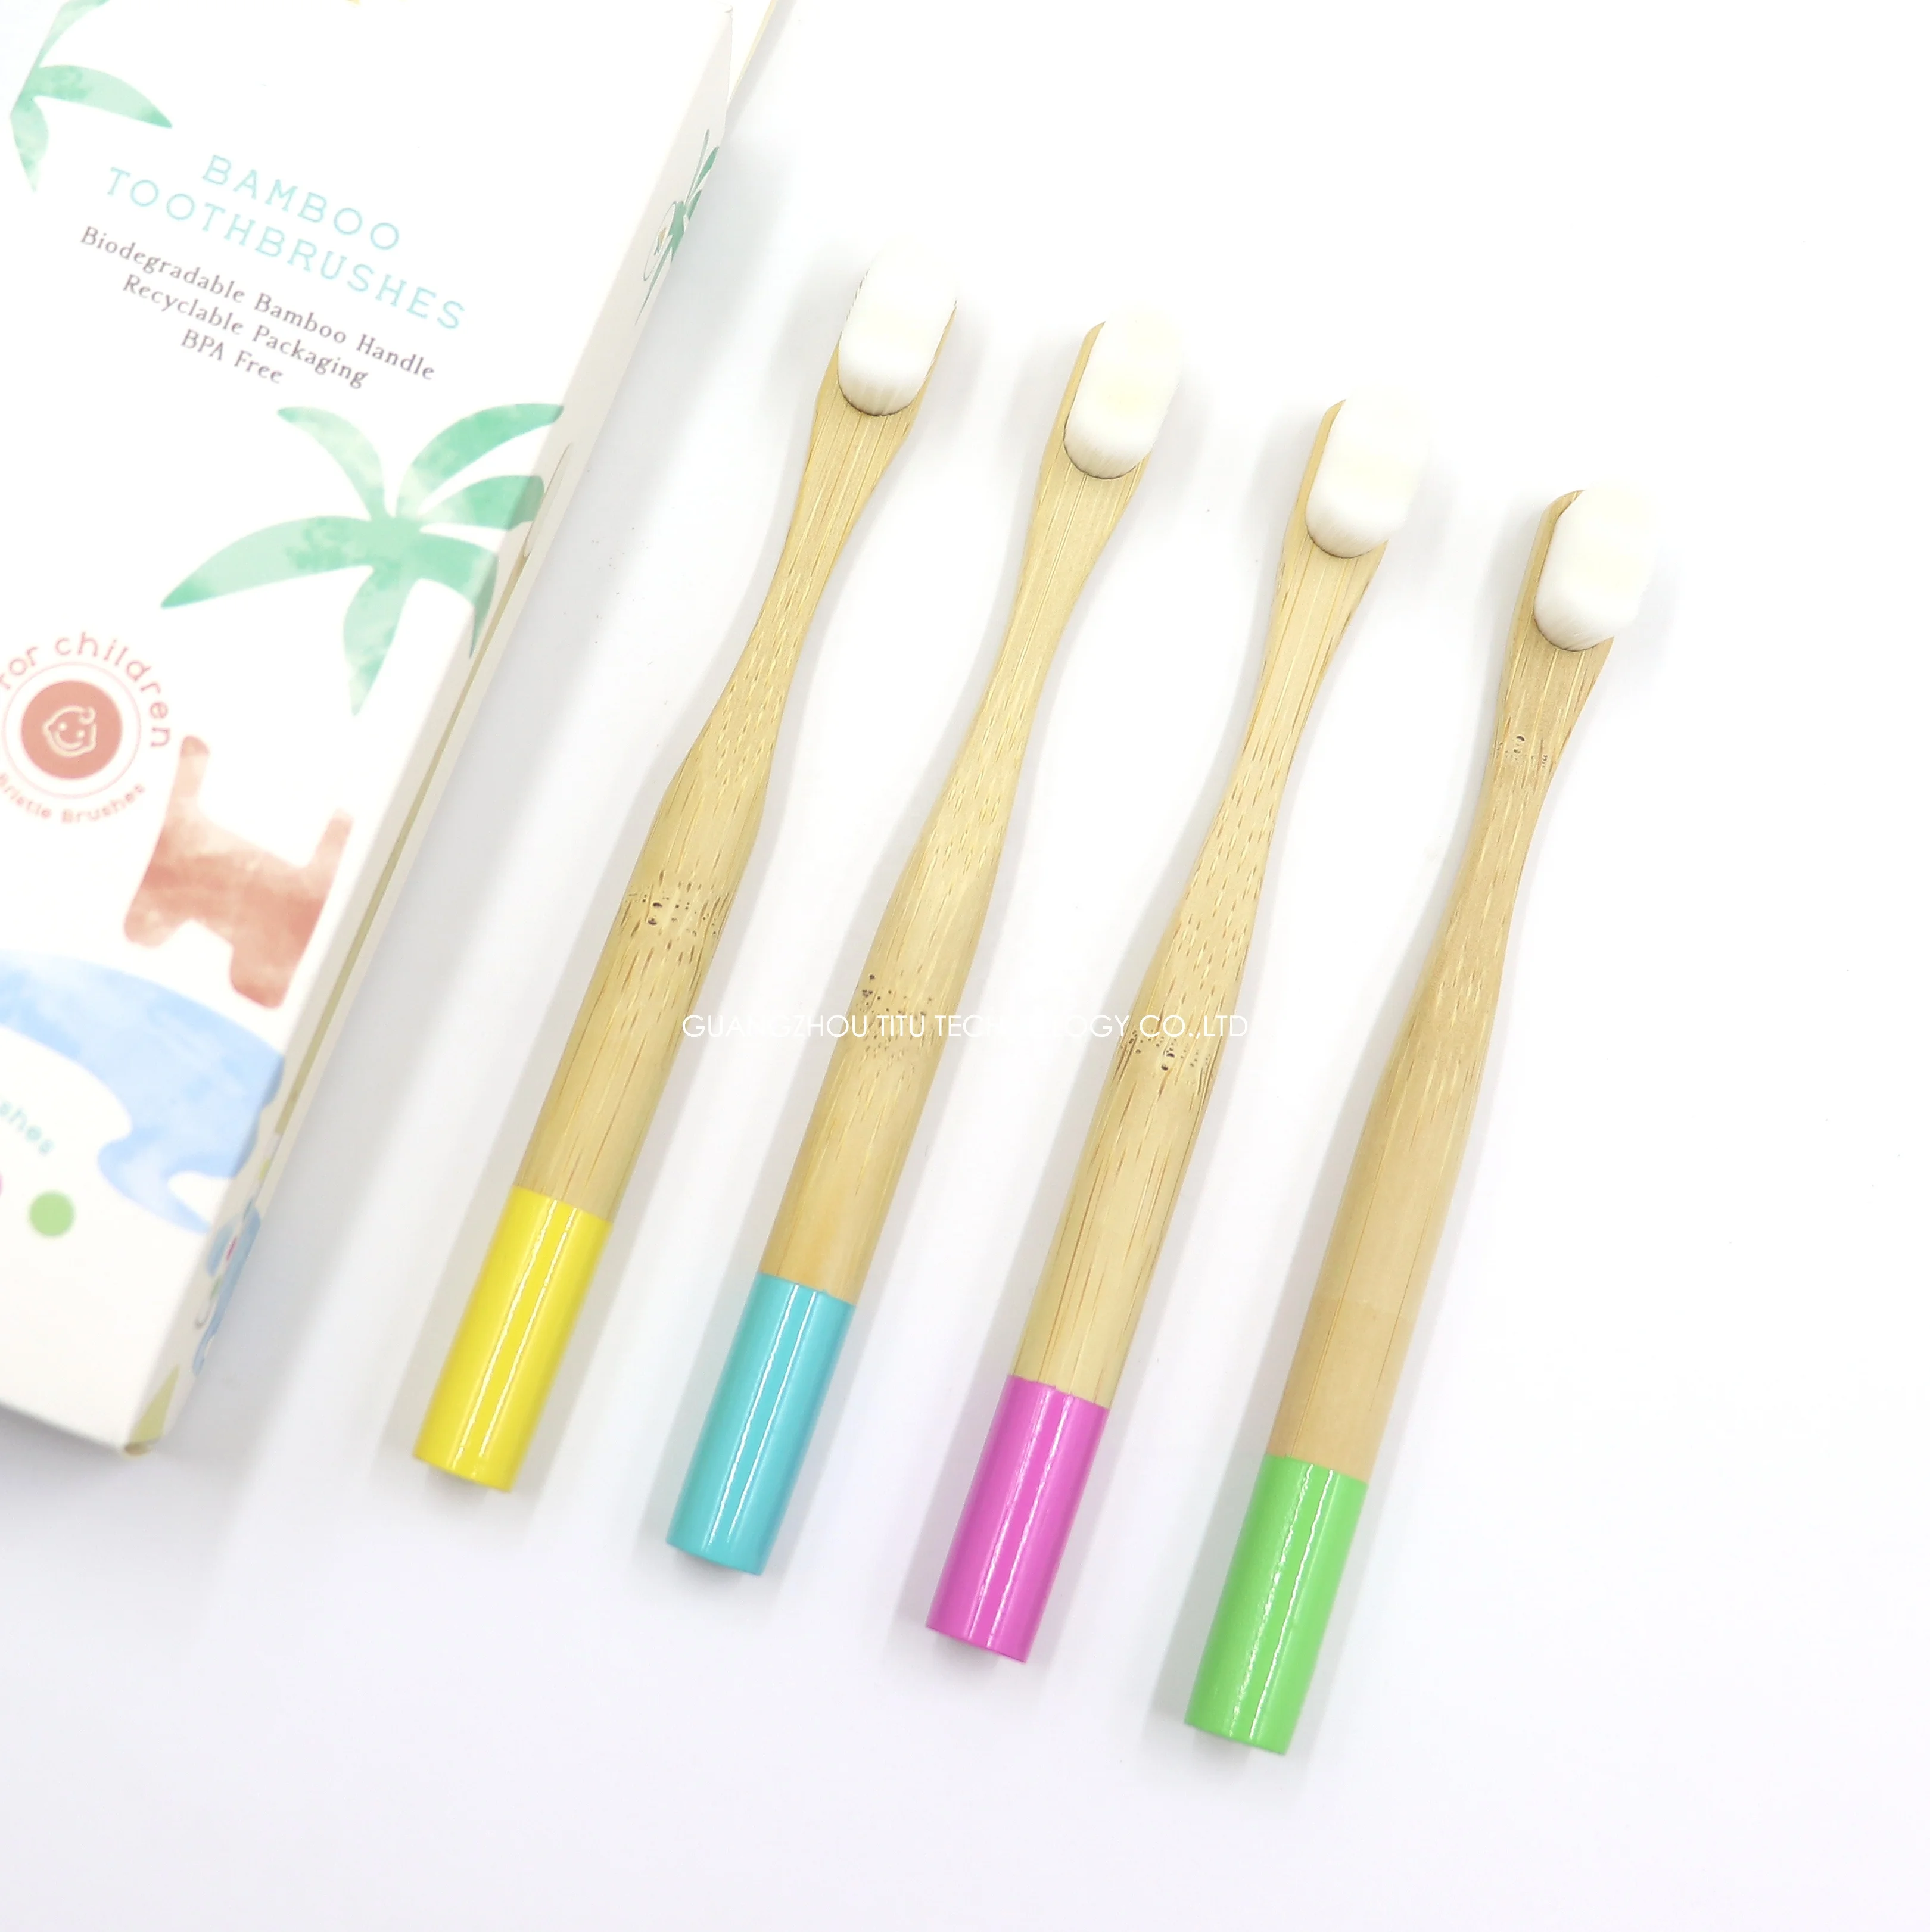 

TIITEE Extra Soft Toothbrush For Sensitive Gums Micro-Nano Colored Handle Toothbrush 20000 Soft Floss Bristle Bamboo Toothbrush, Multi color